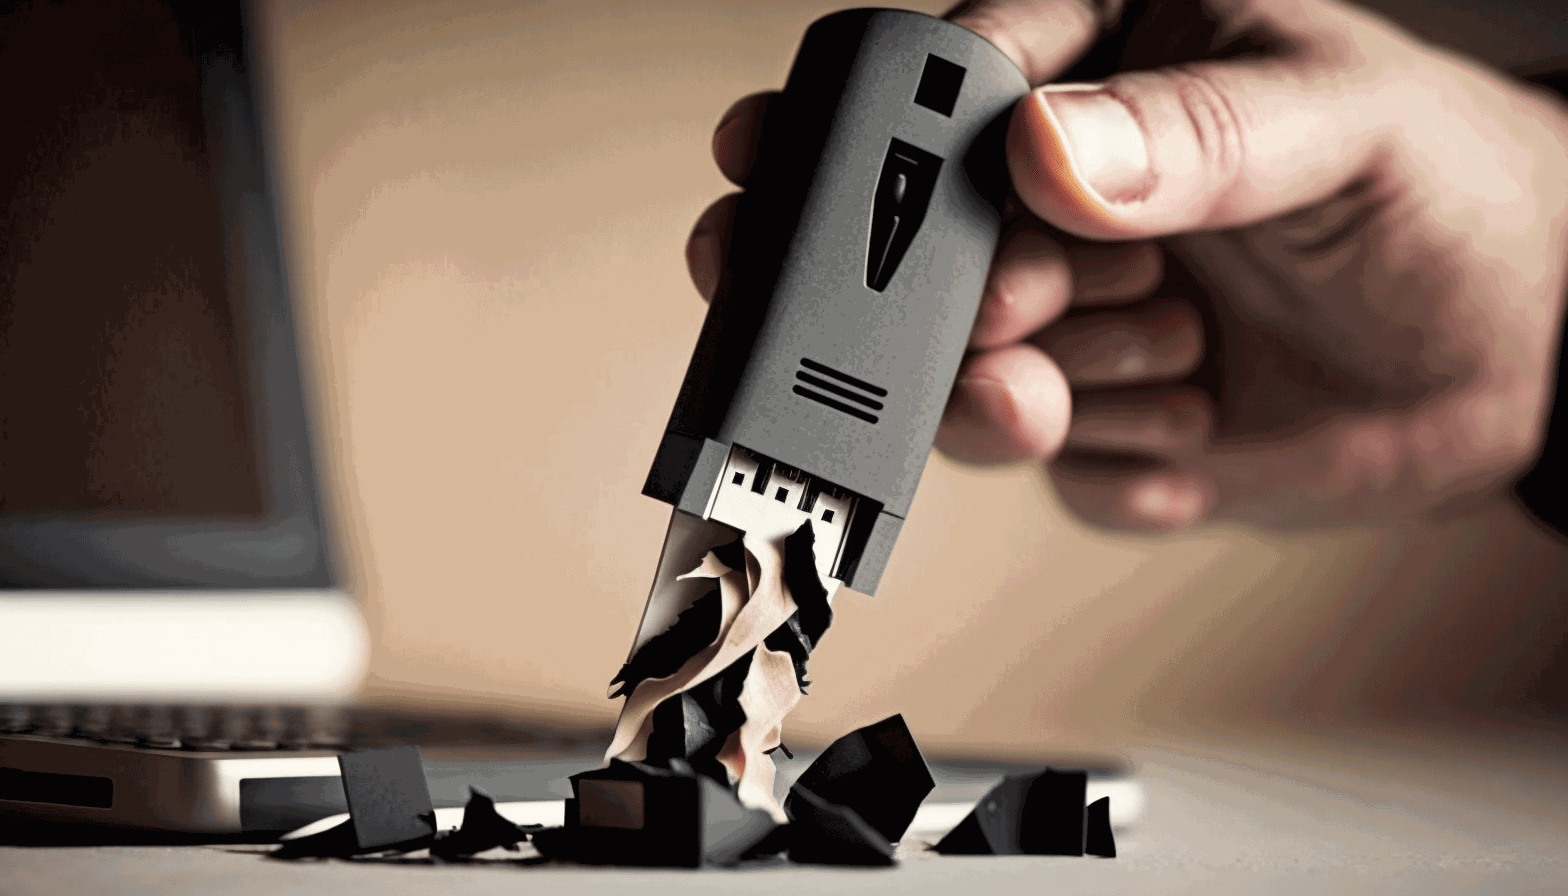 An image of a person holding a USB flash drive with a shredder in the background